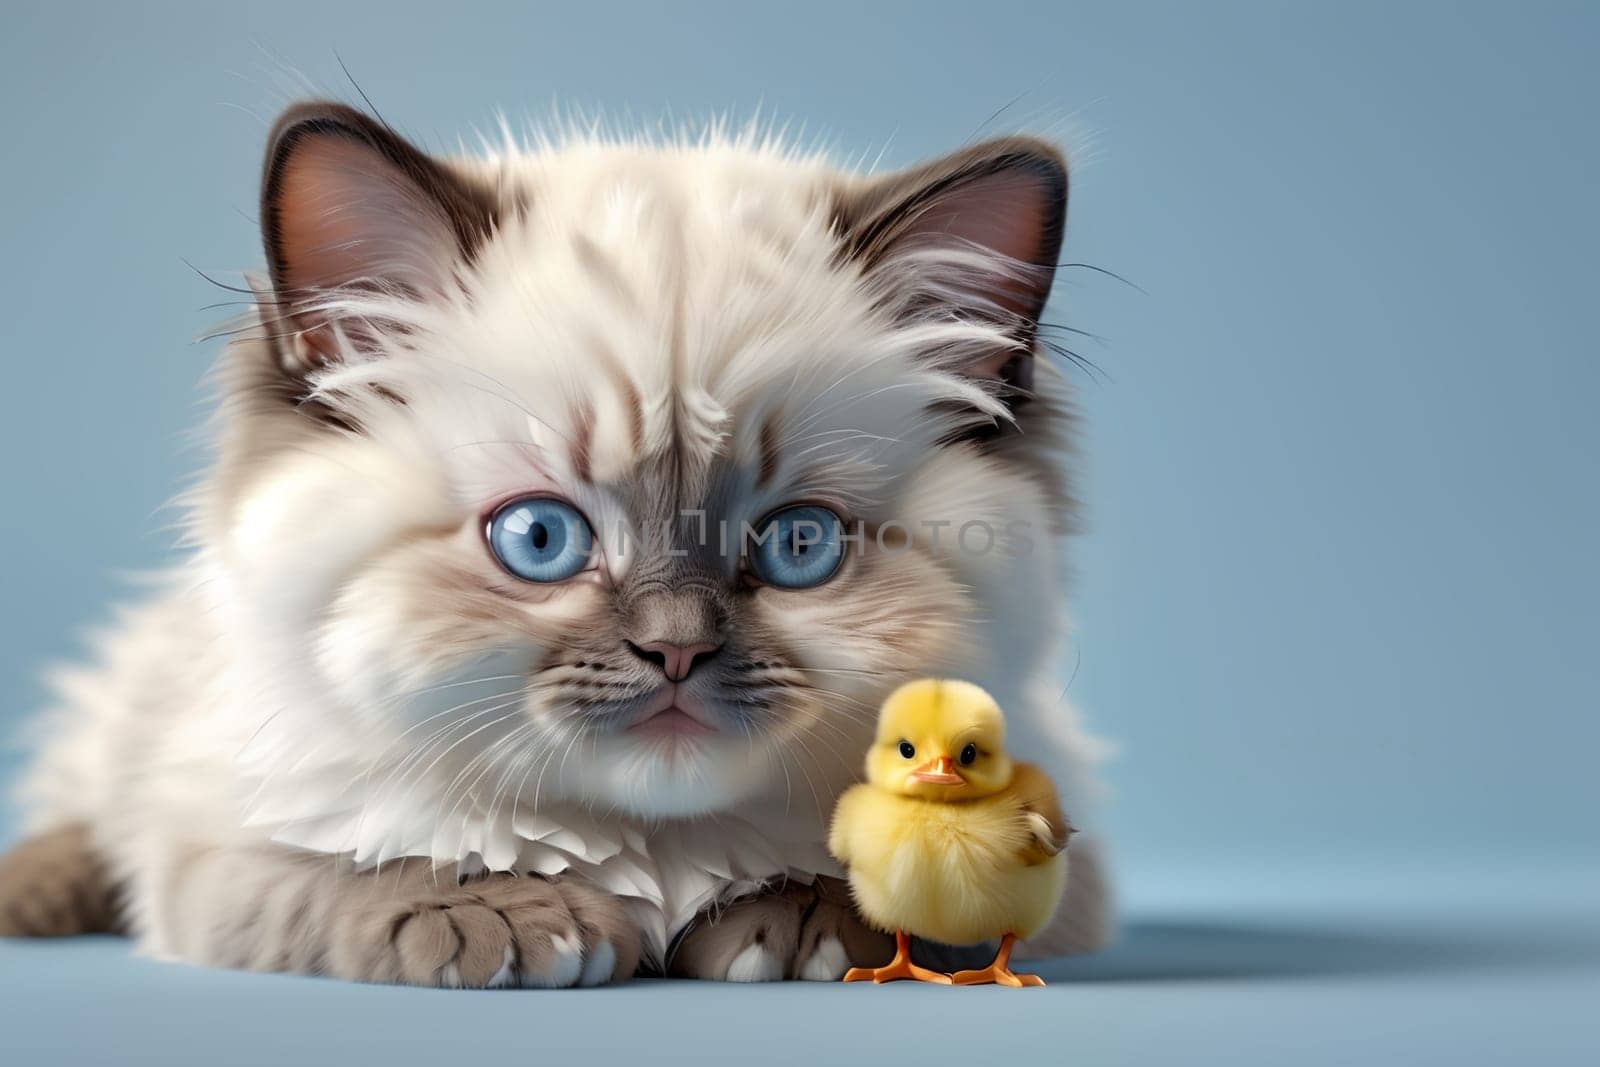 cute kitten and yellow chick, isolated on blue background .